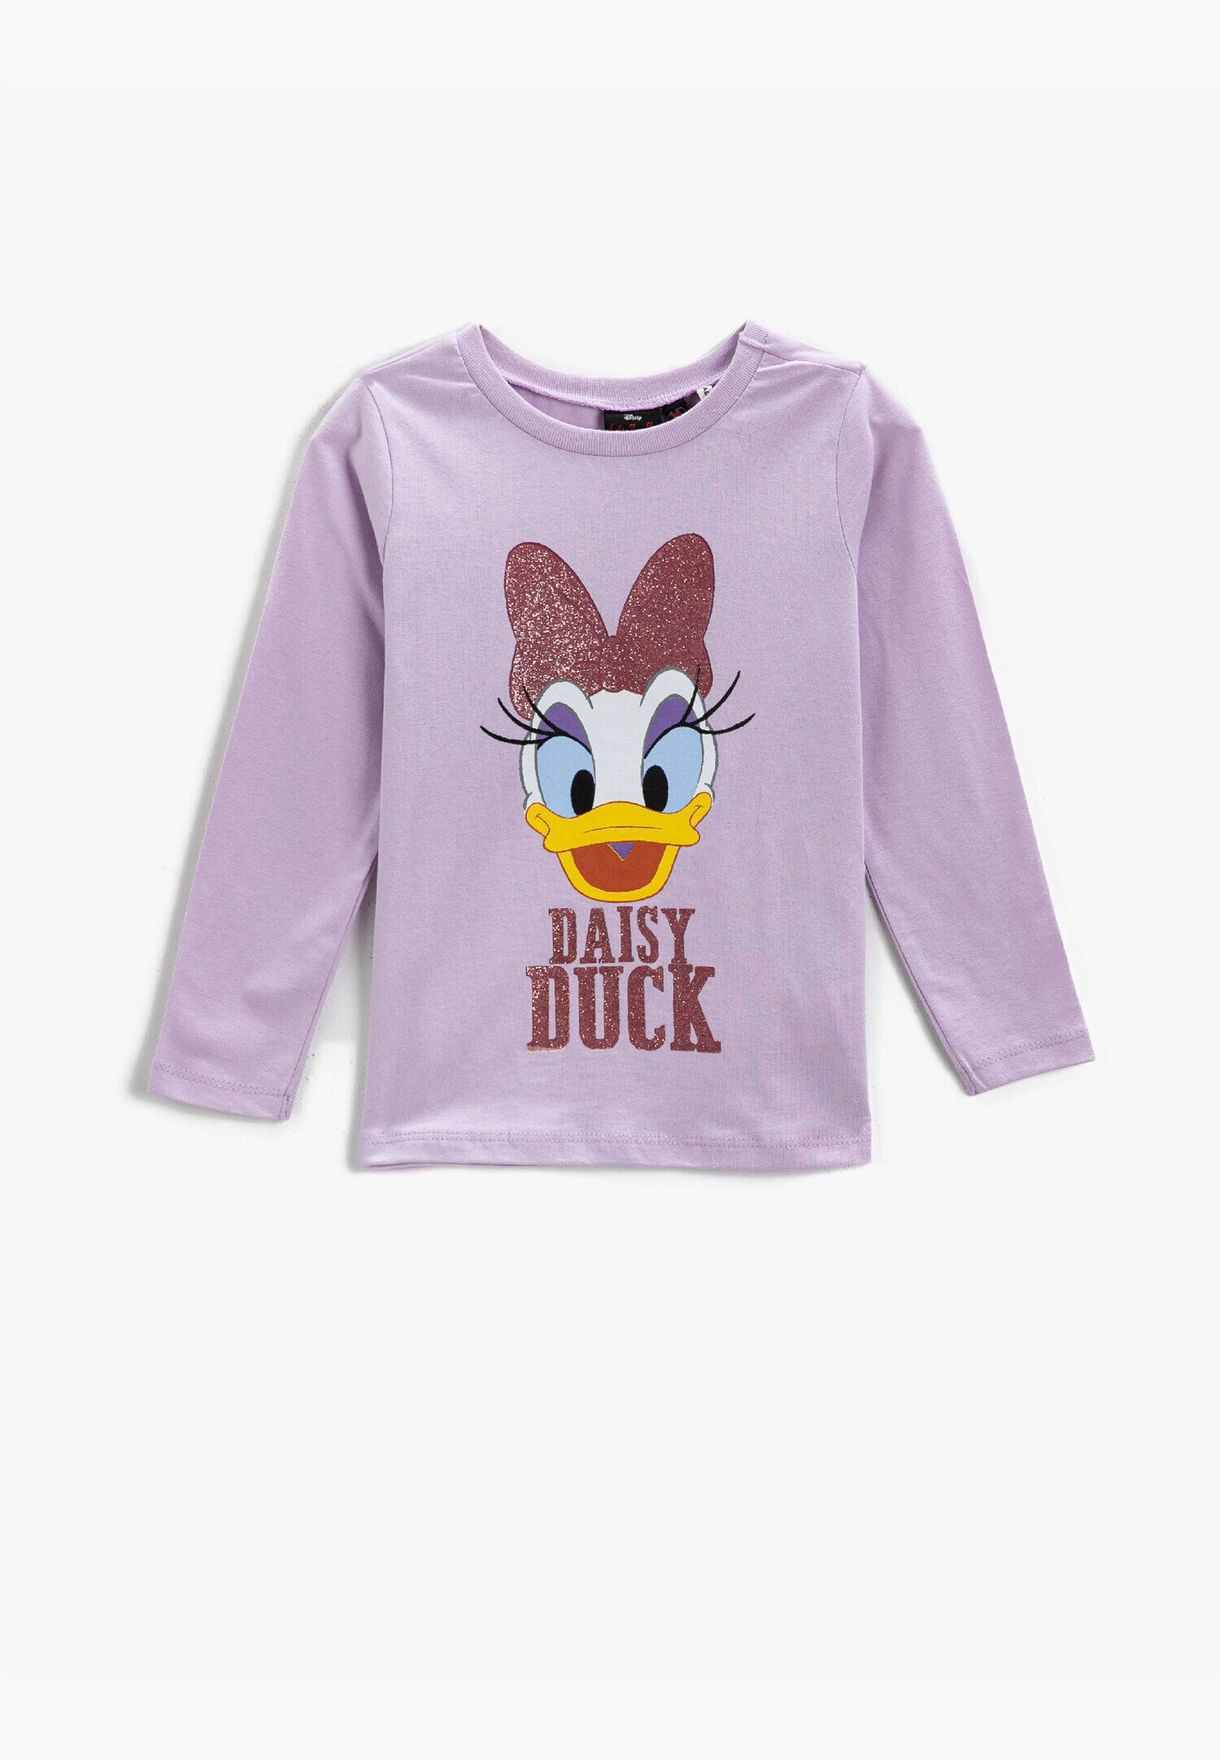 Daisy Duck Licensed Printed T-Shirt Cotton Long Sleeve